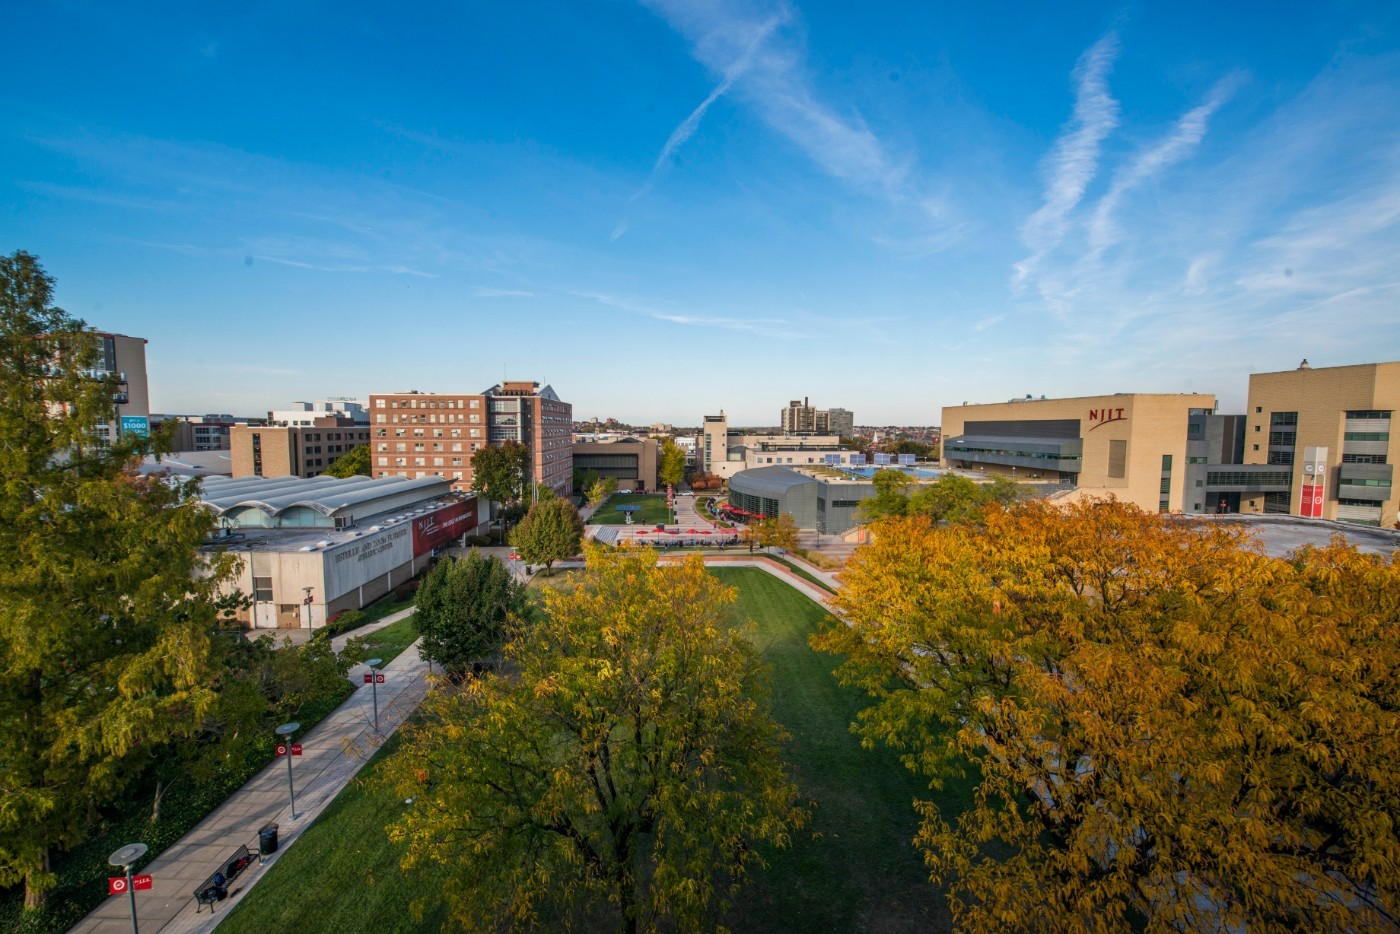 Njit Calendar Fall 2022 New Jersey Institute Of Technology – Isep Study Abroad